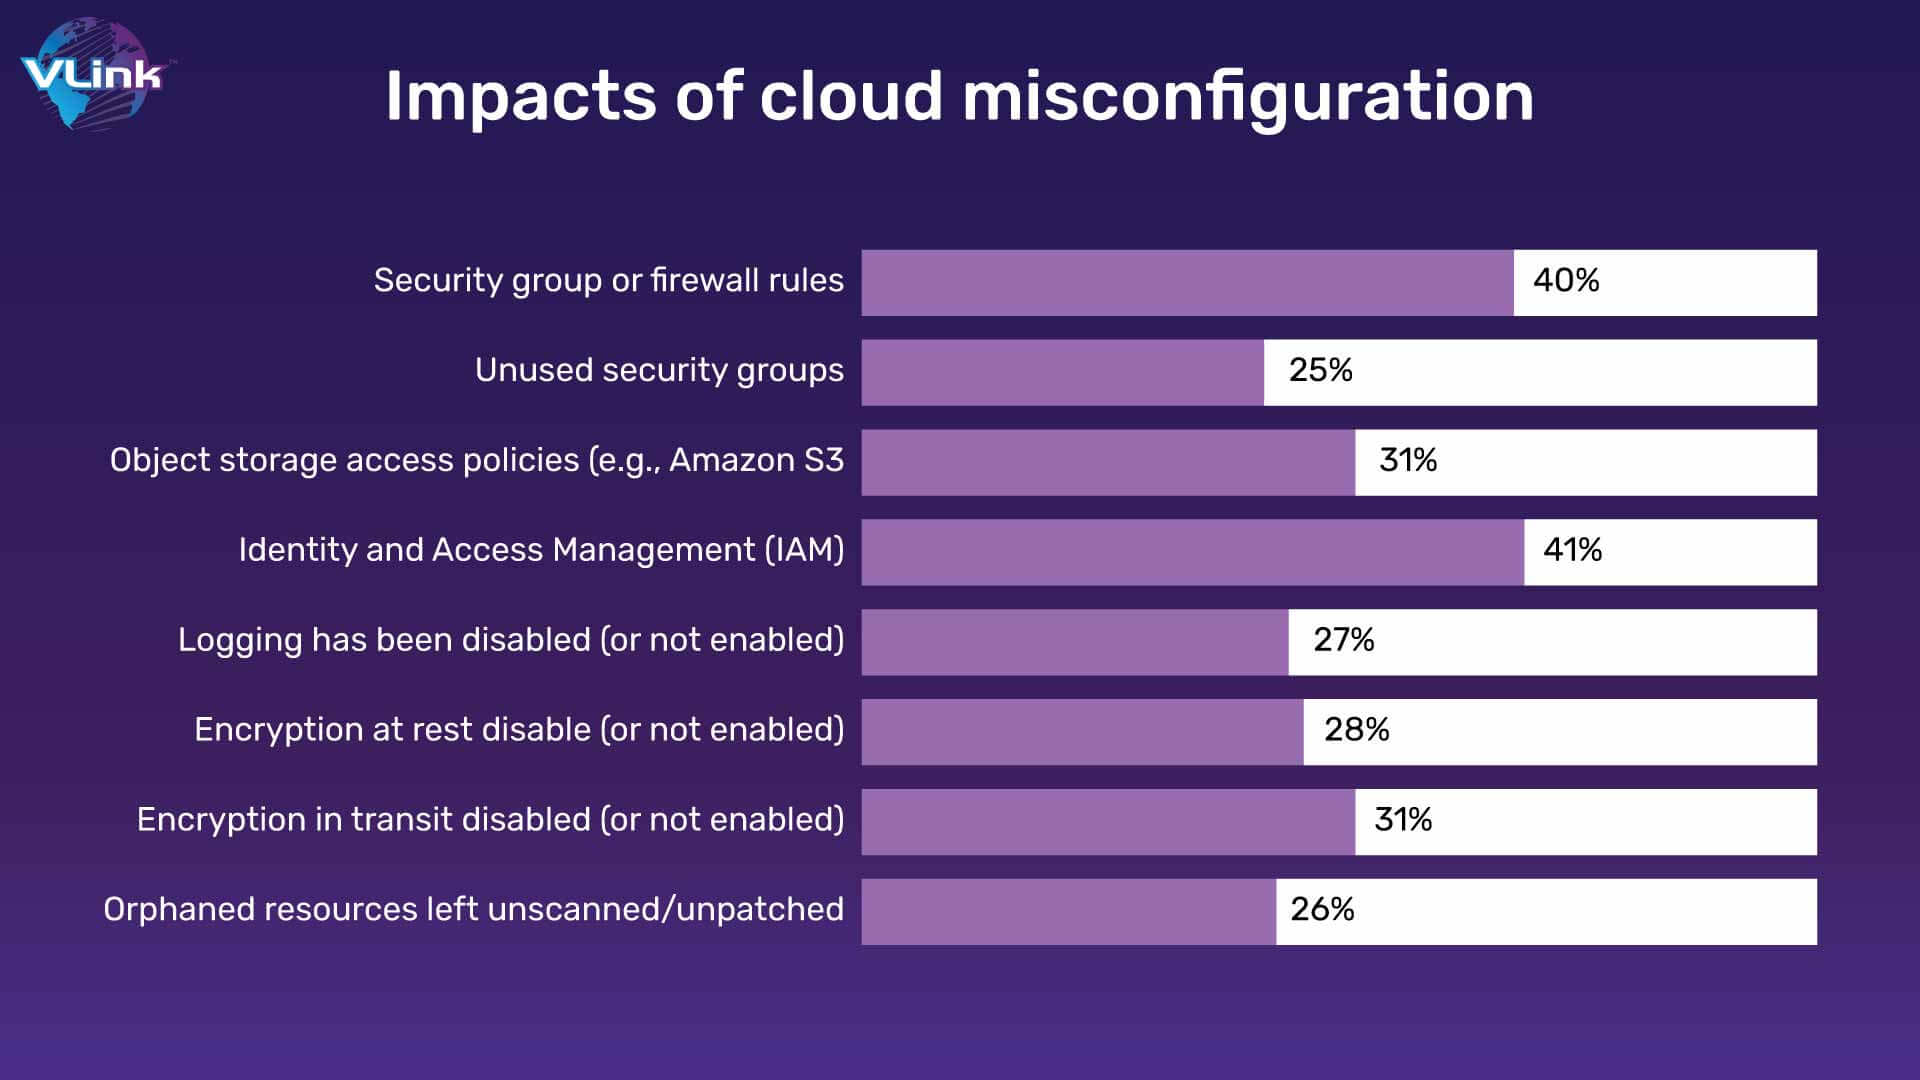 Impacts of cloud misconfiguration